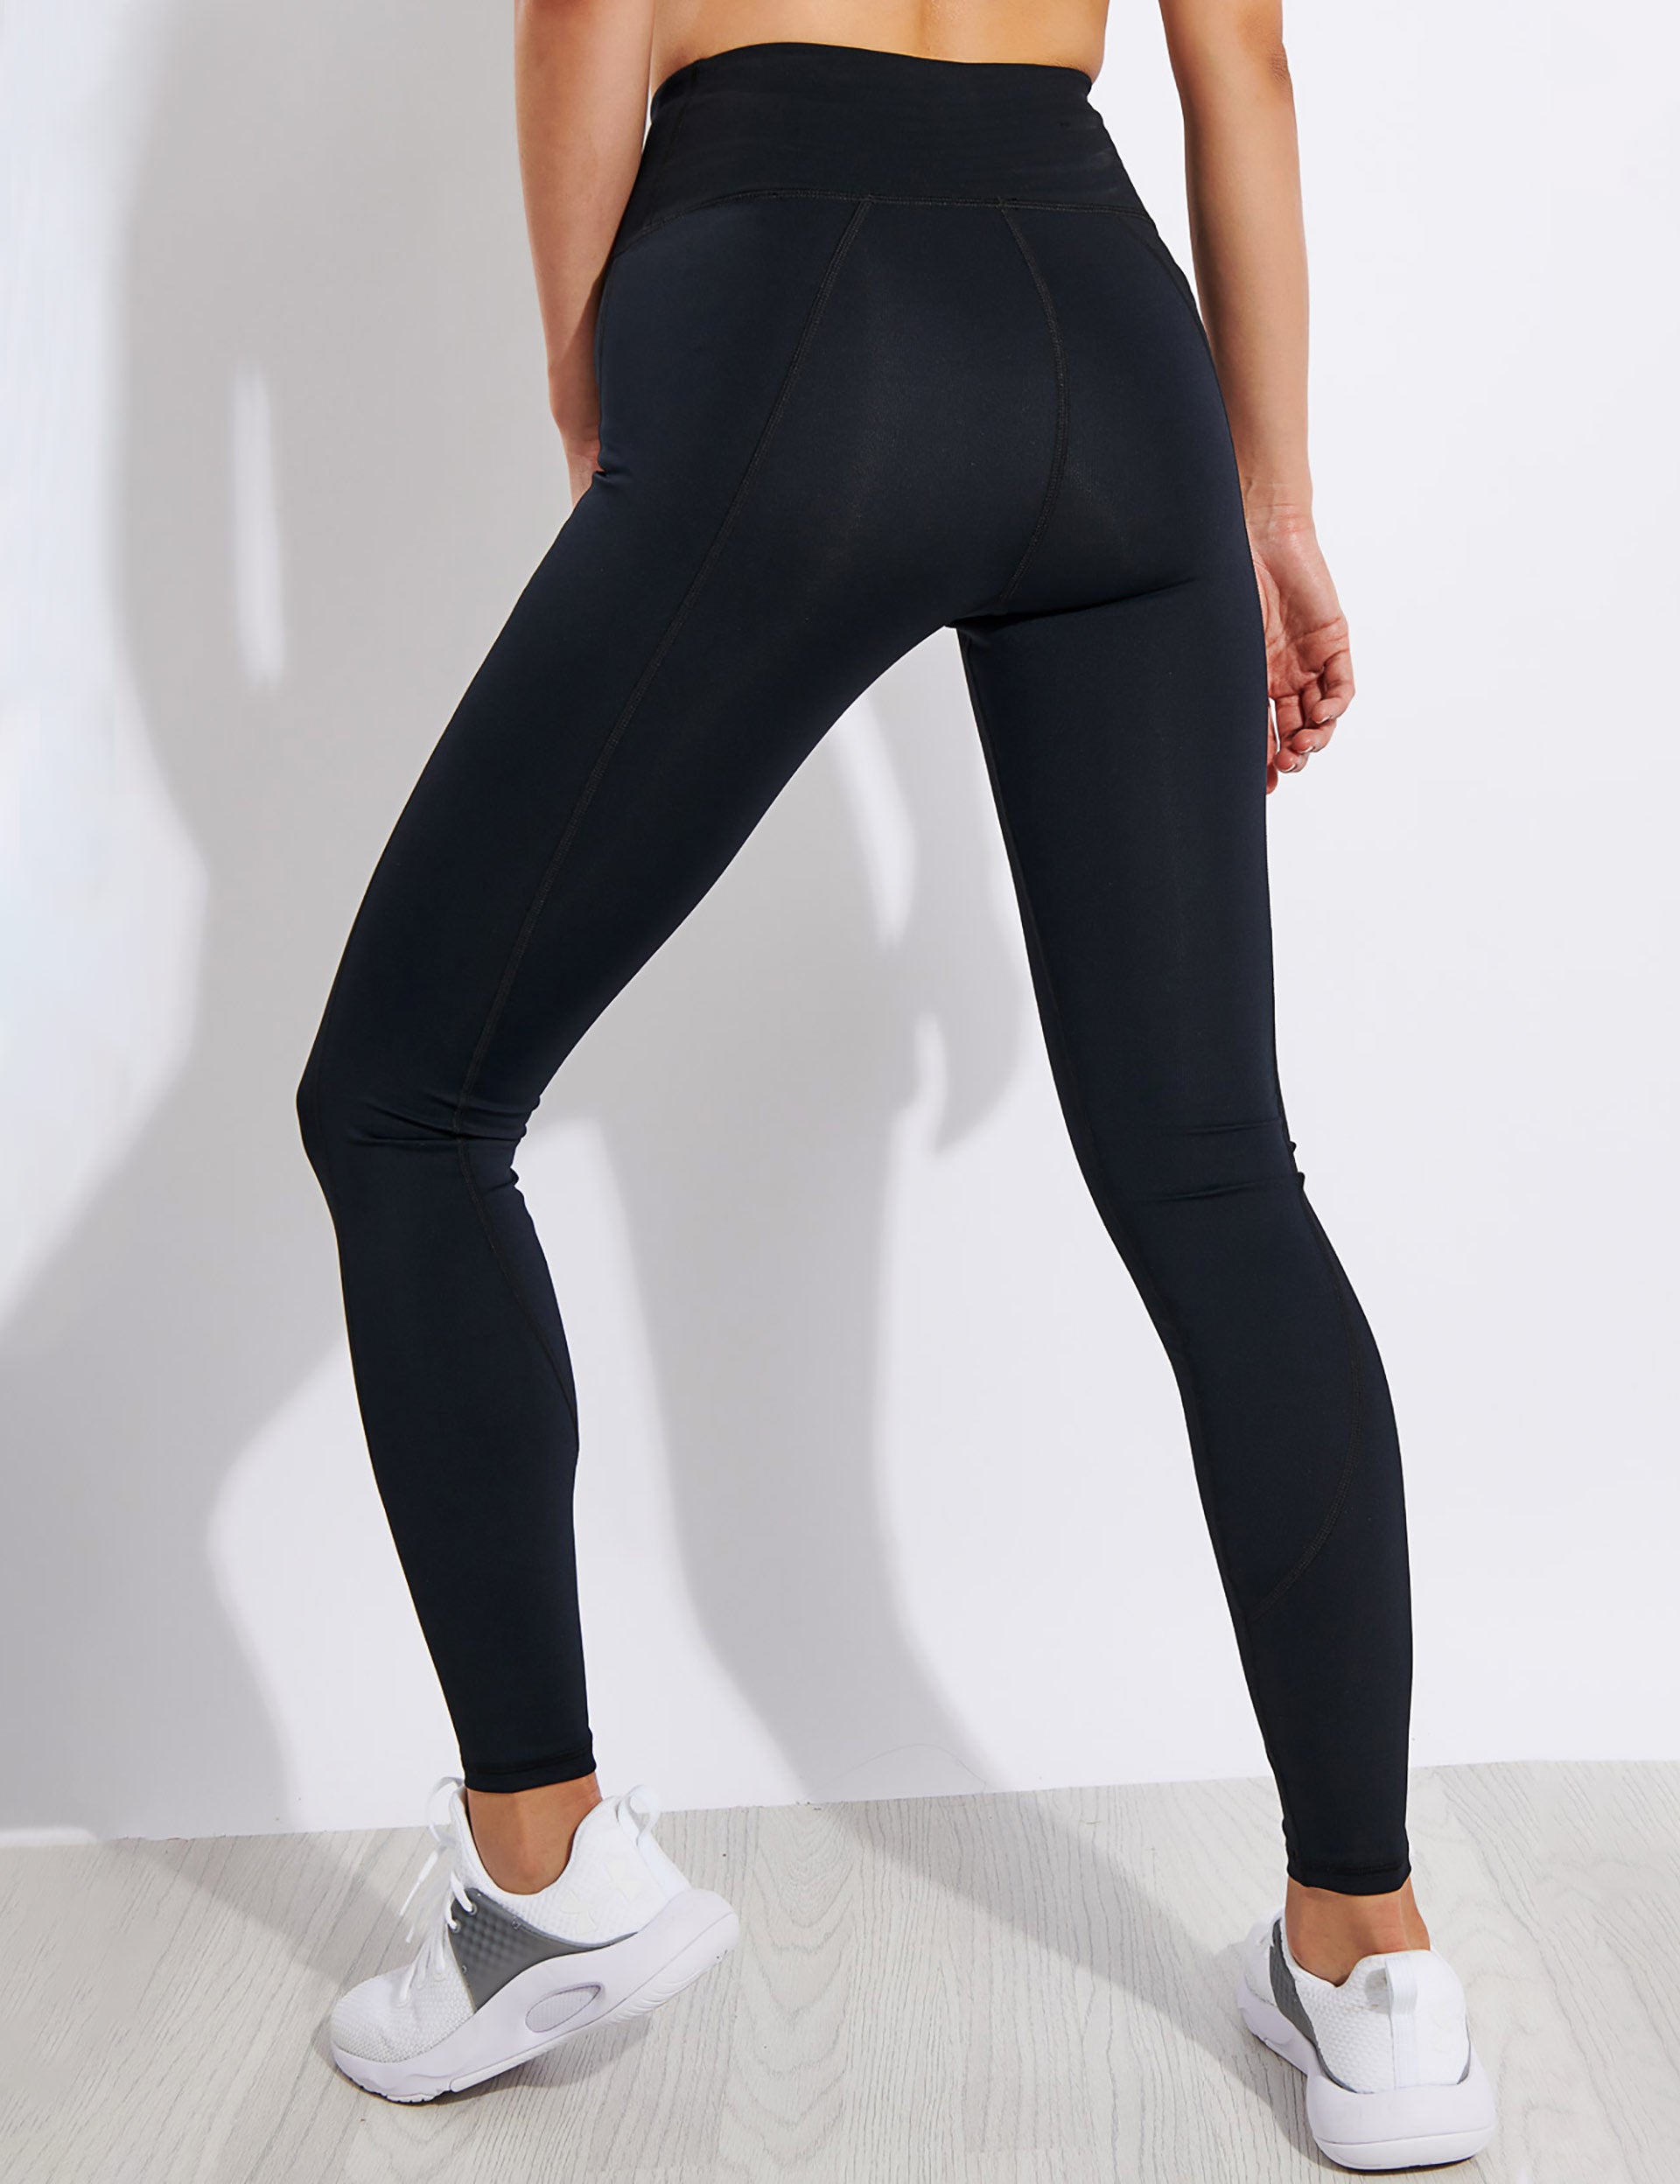 Under Armour Leggings No Slip Waistband: Do They Truly Stay Up?